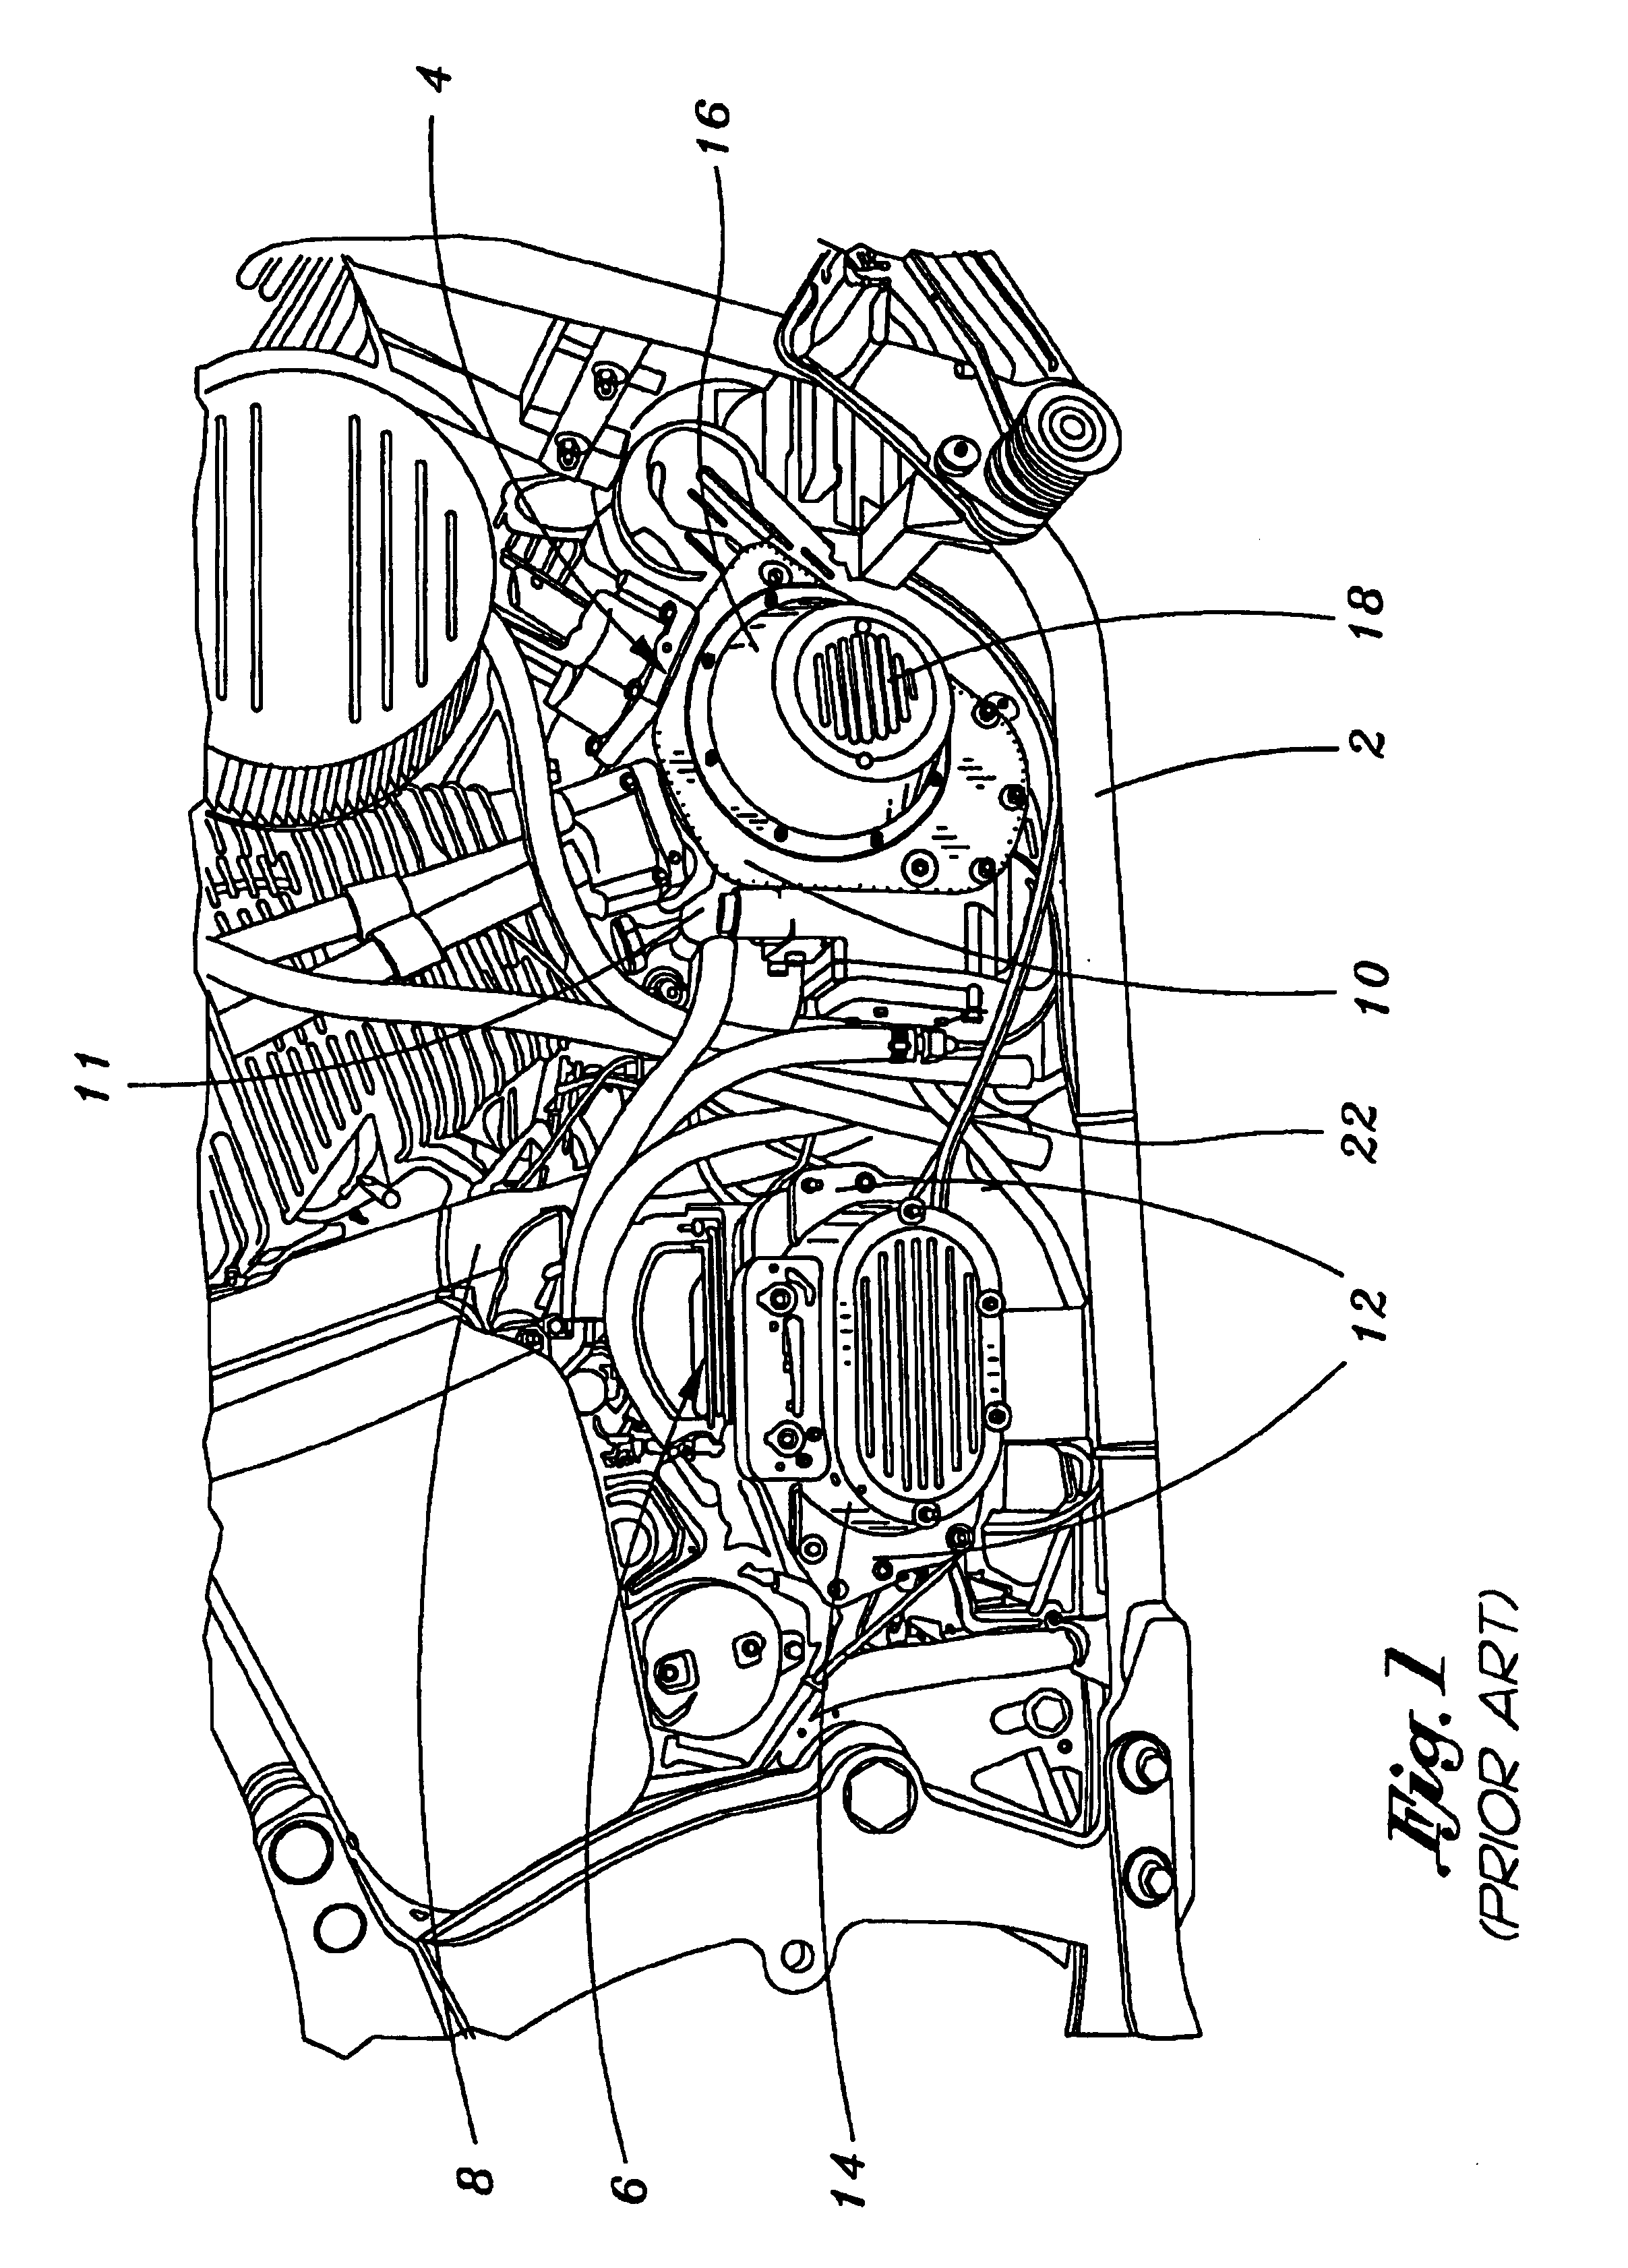 Motorcycle engine and transmission interbracing member